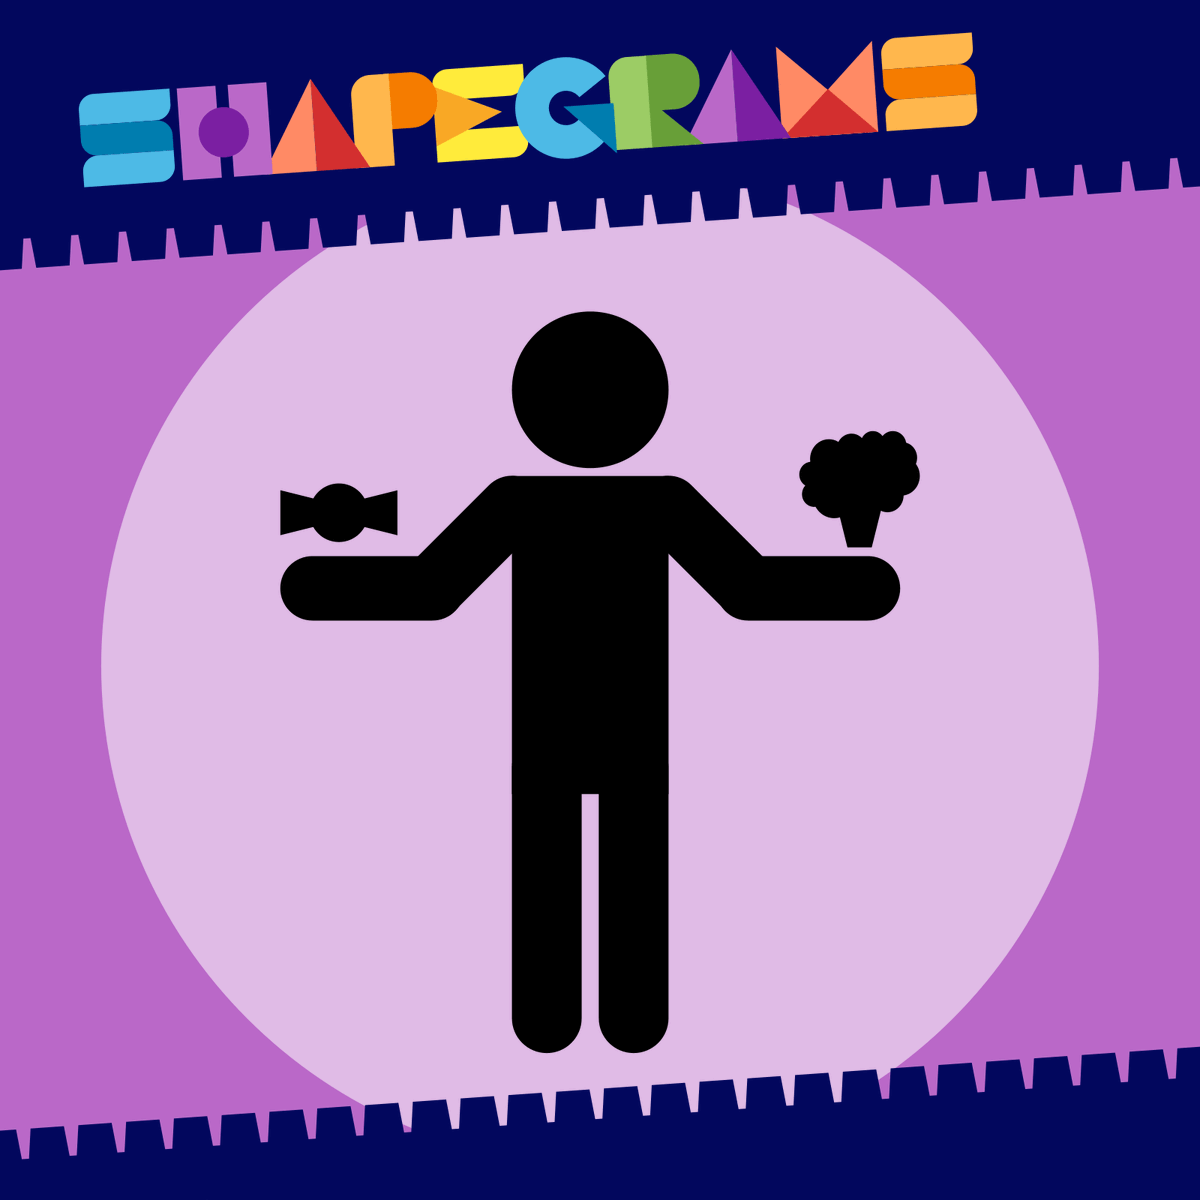 Be a BROC star! 🥦⭐️ Recreating the 'Which Icon' is an enWHICHing experience. Get it in #GoogleSlides or #GoogleDrawings for free: shapegrams.com/which #Shapegrams #GoogleEdu #GoogleClassroom